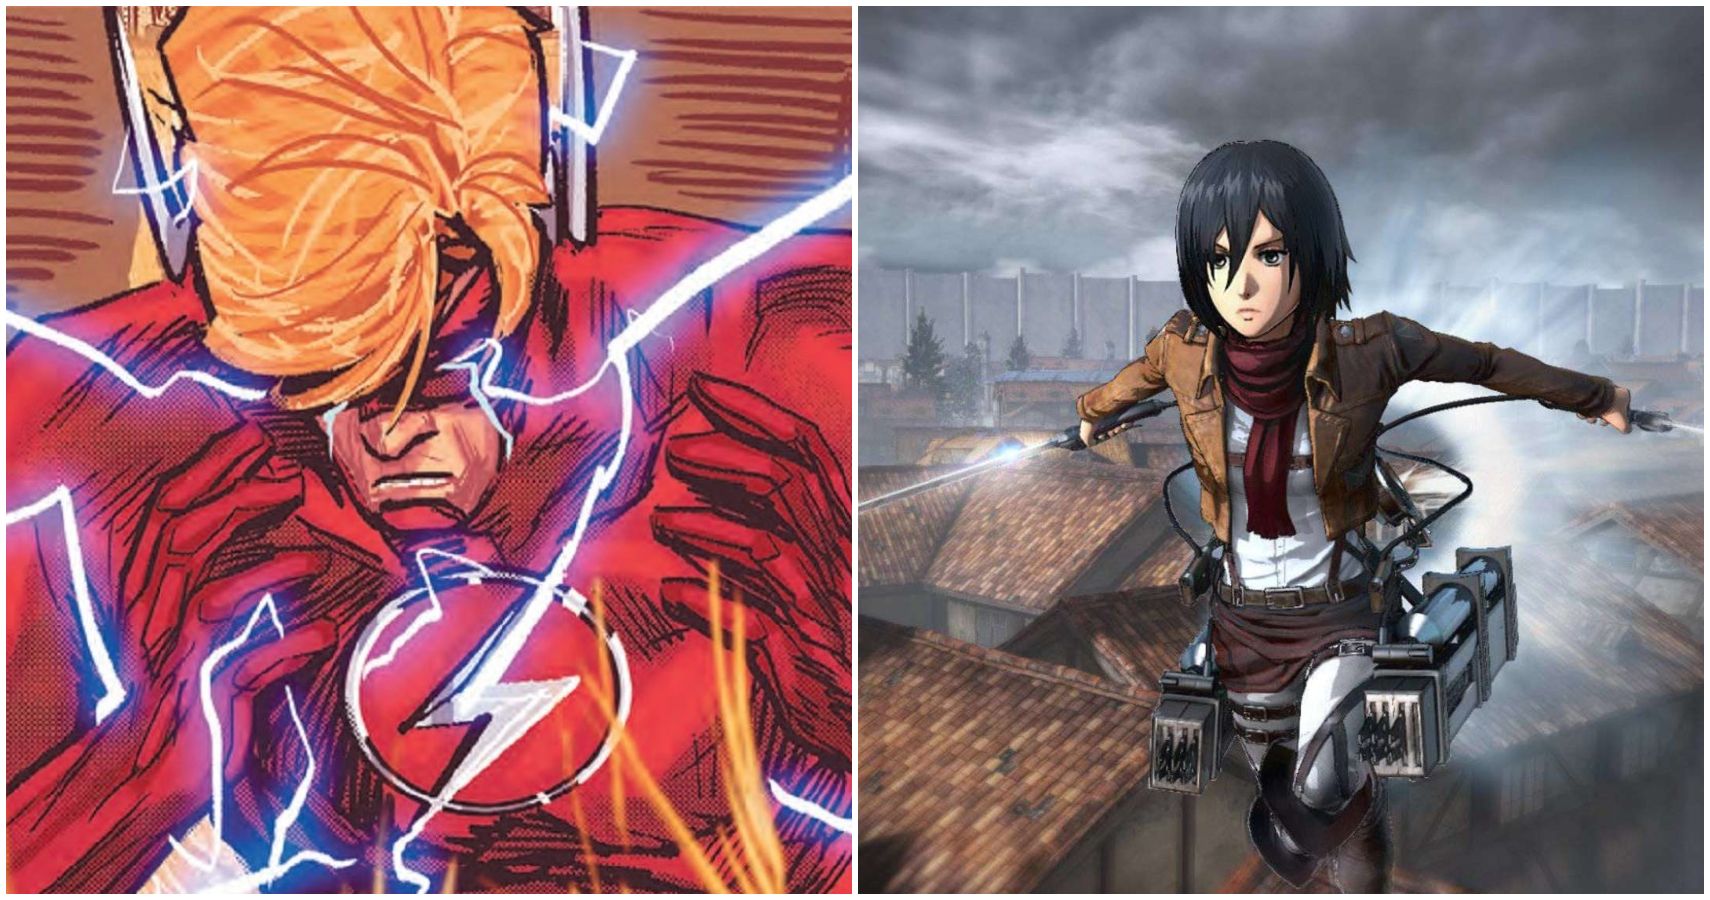 10 Anime/DC Crossover Couples We'd Love To See CBR